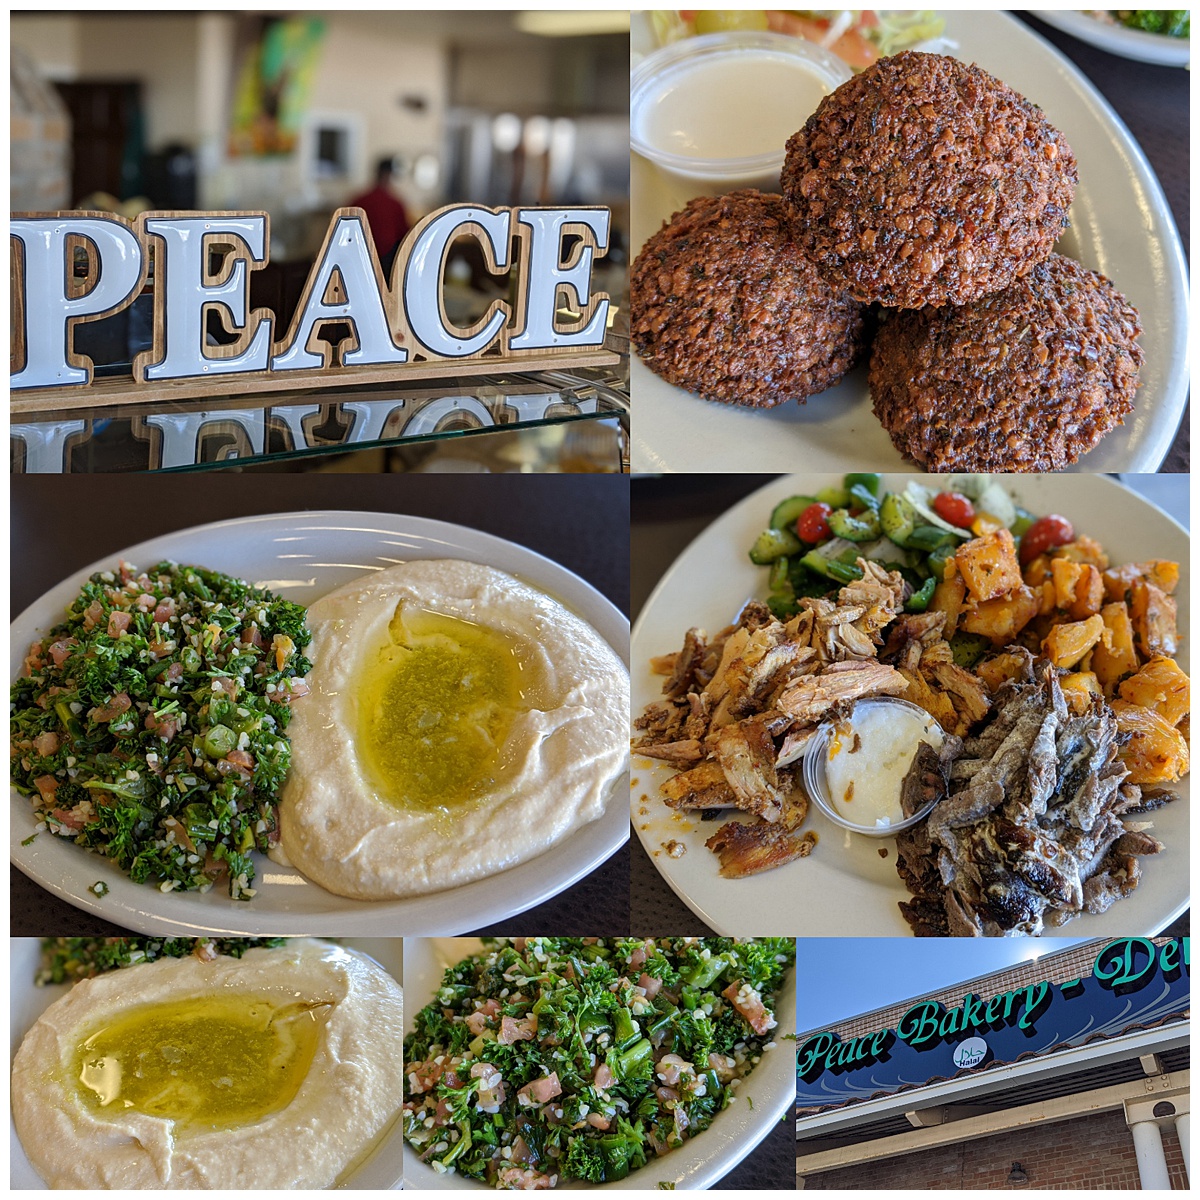 Peace Bakery Montage